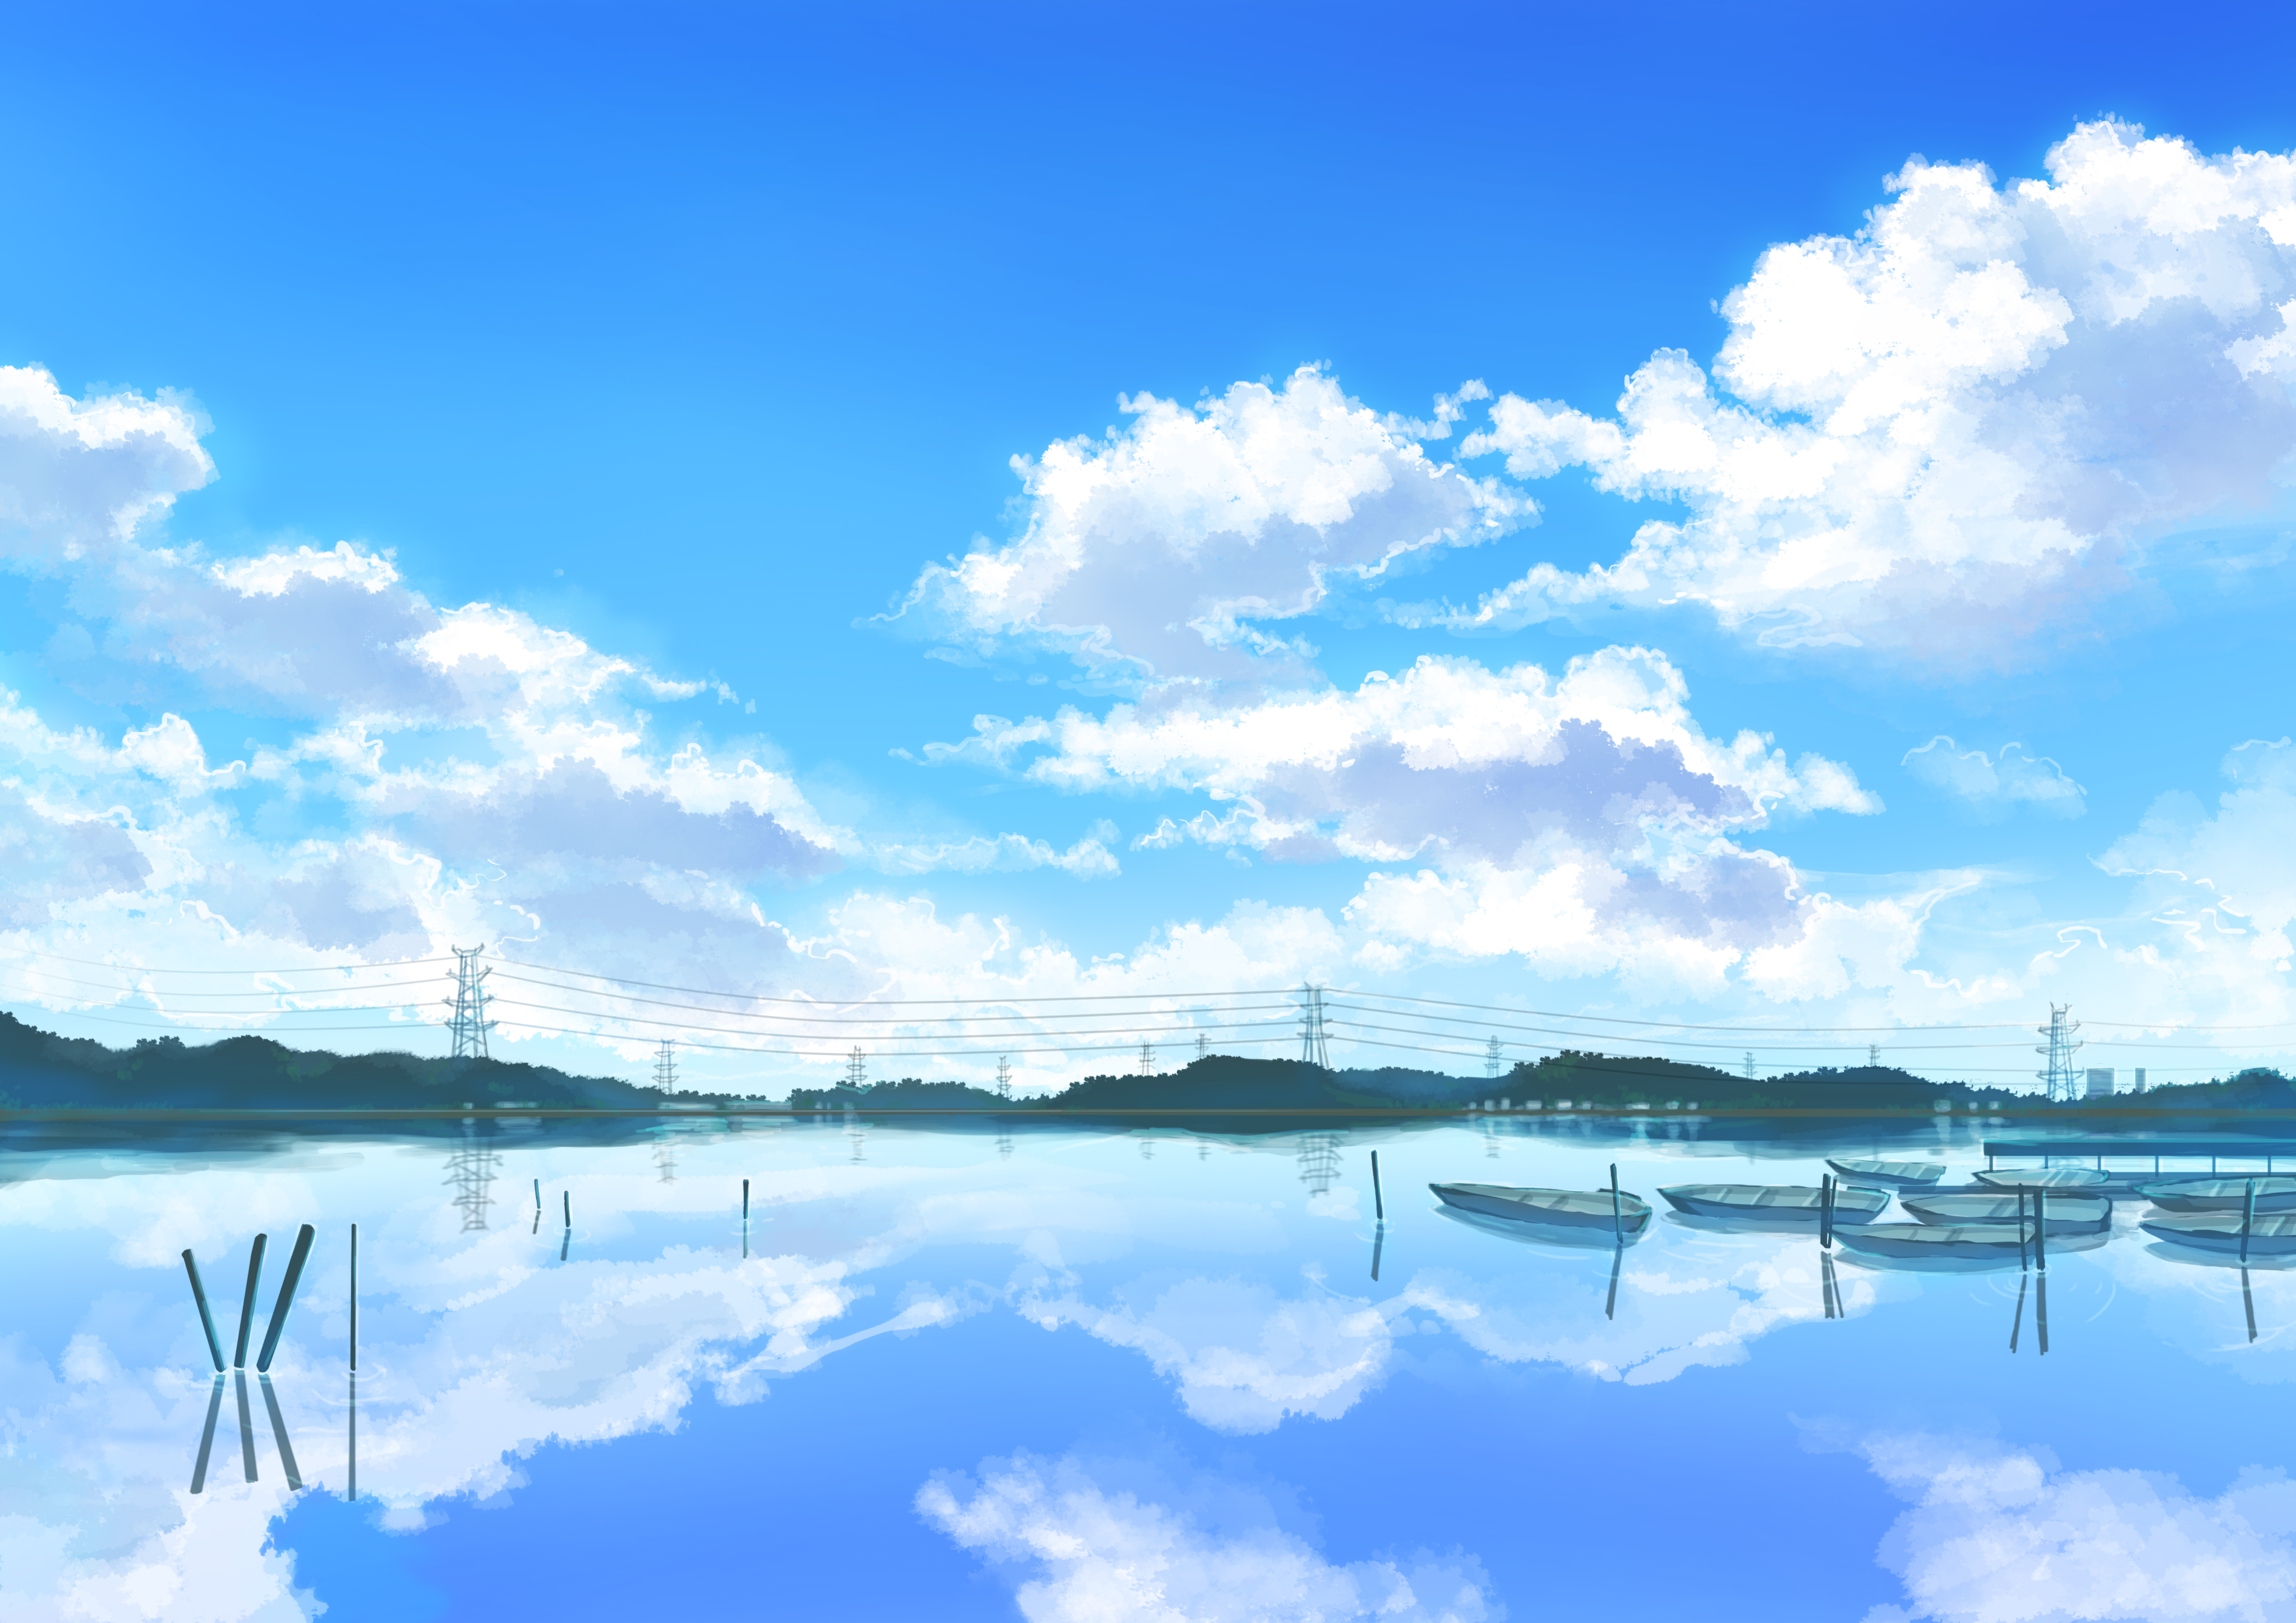 Anime Scenery Wallpaper - Anime Scenery No Copyright , HD Wallpaper & Backgrounds